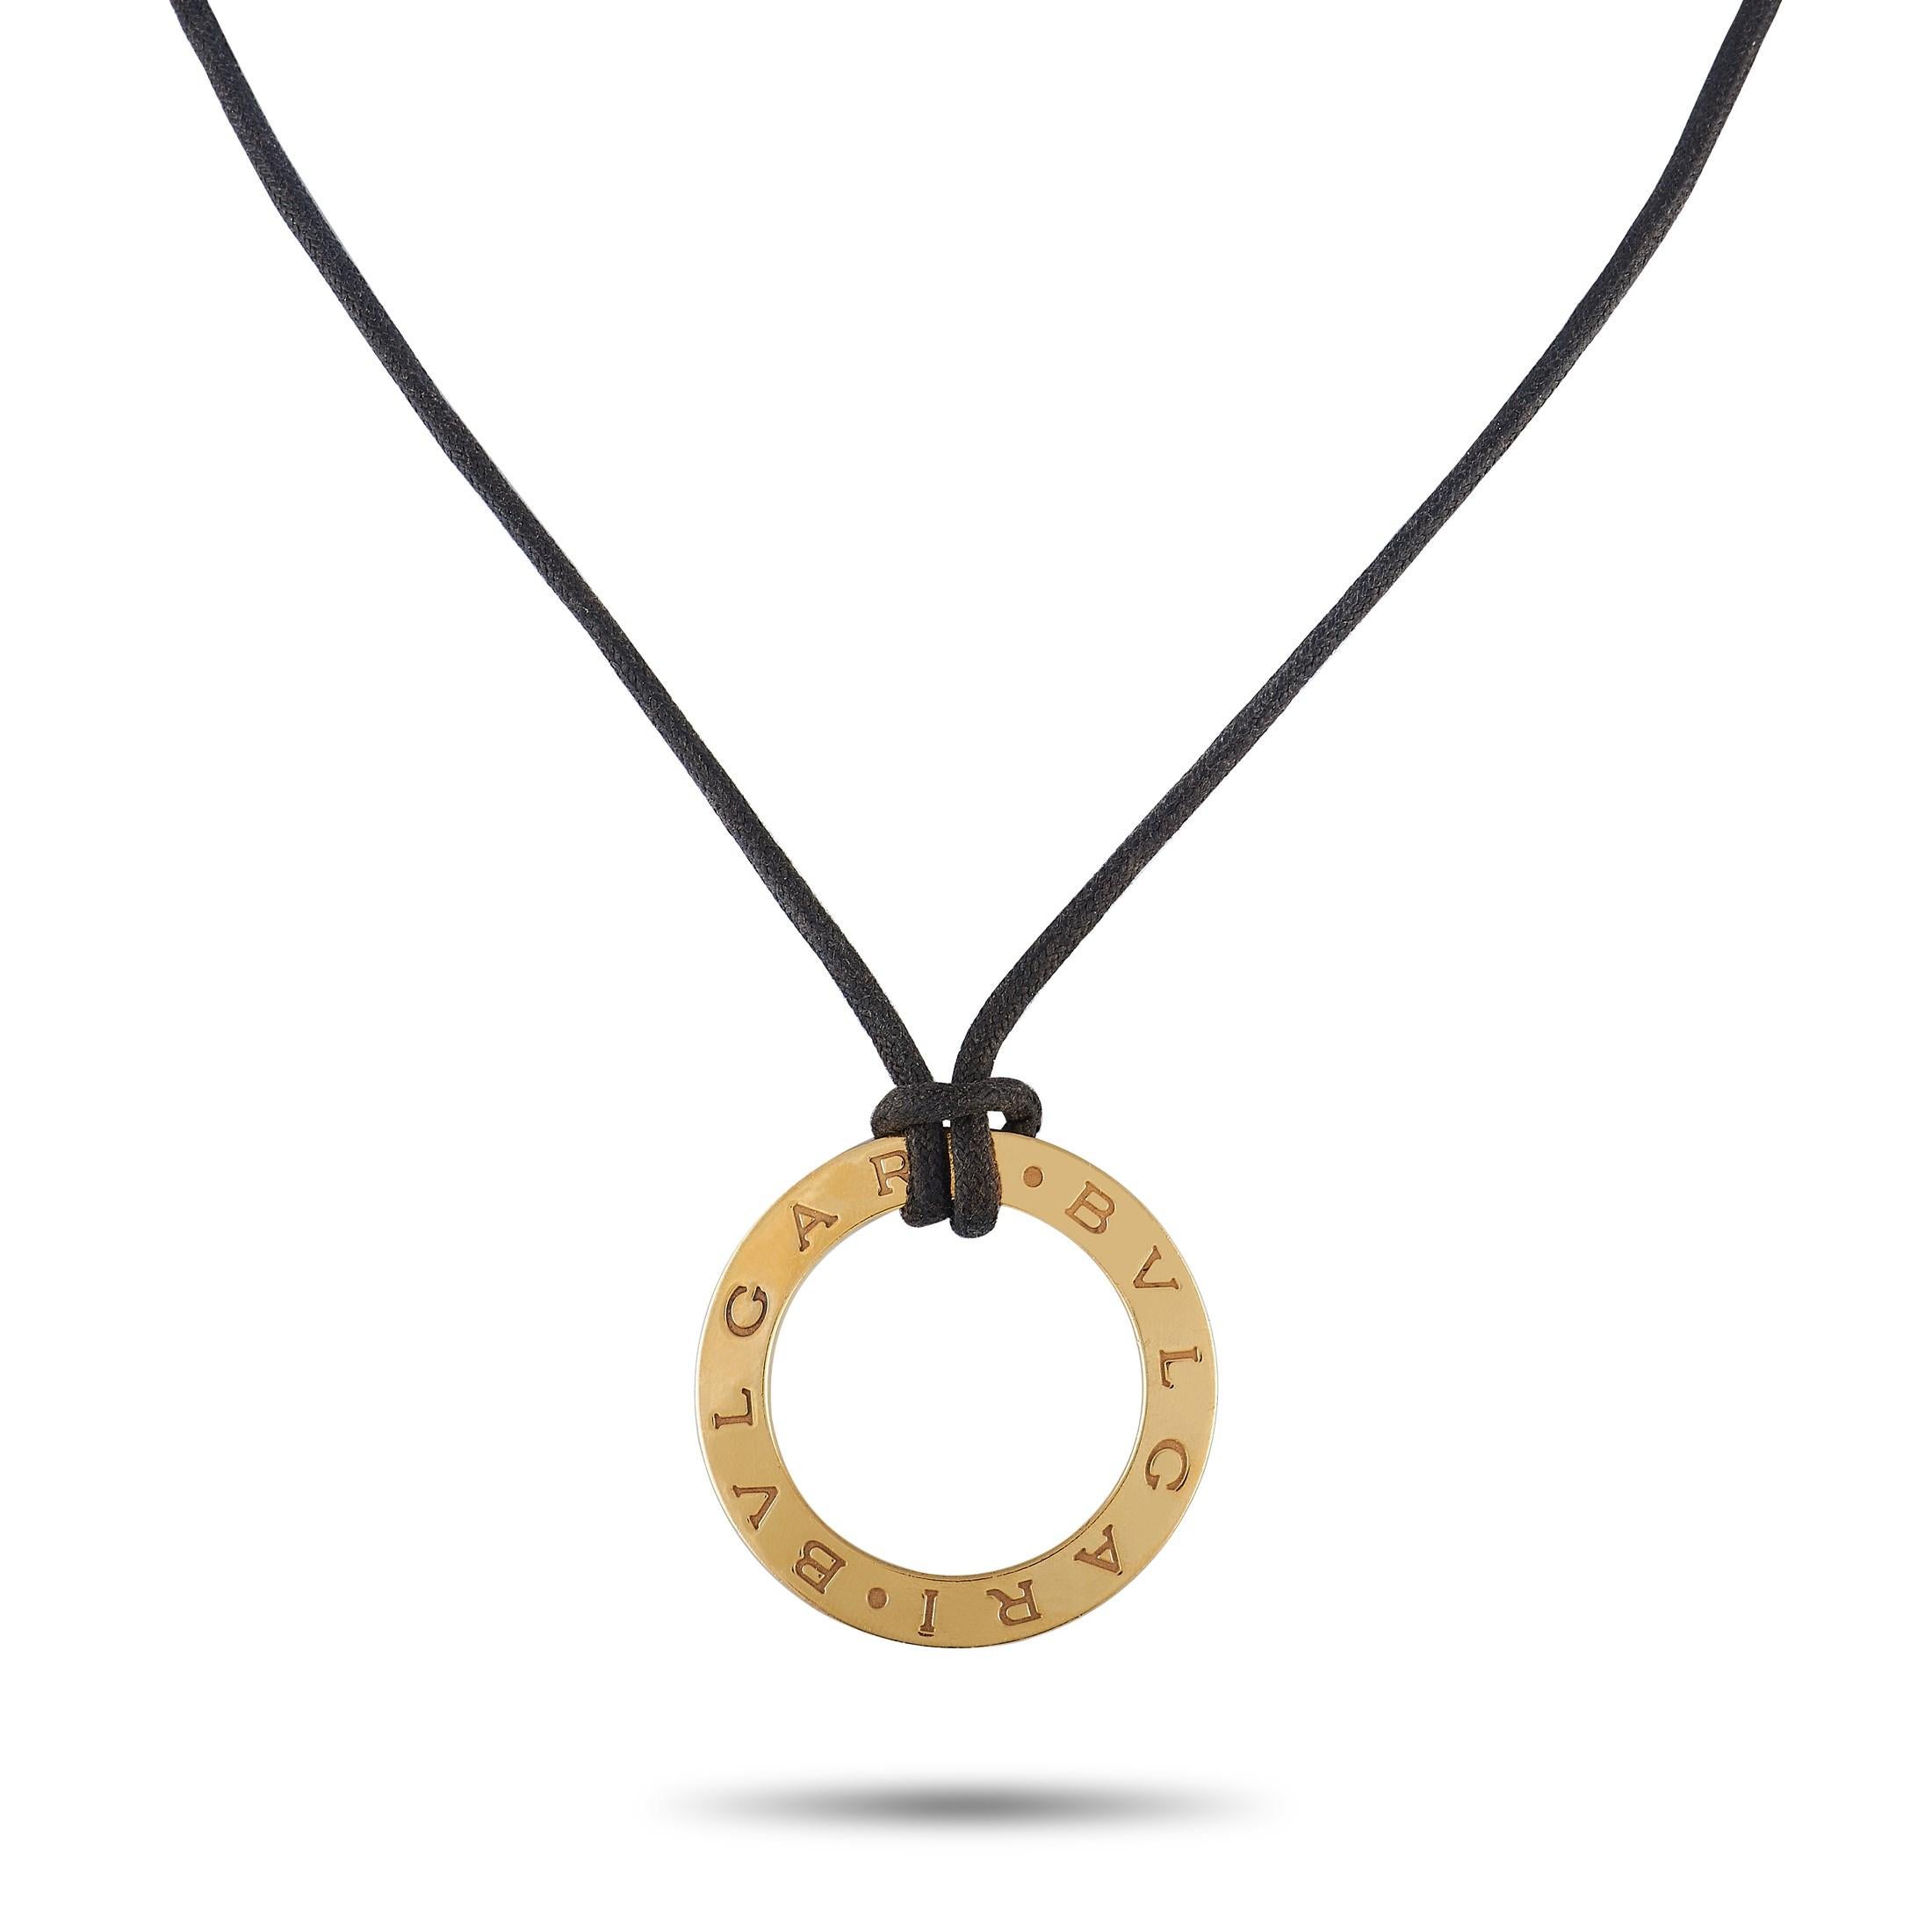 This dynamic Bvlgari necklace pairs lustrous 18K Yellow Gold with a minimalist cord – the result is a piece of jewelry with a surprising sense of style. A circular pendant measuring 1.45” round proudly displays the luxury brand’s moniker. The 24”